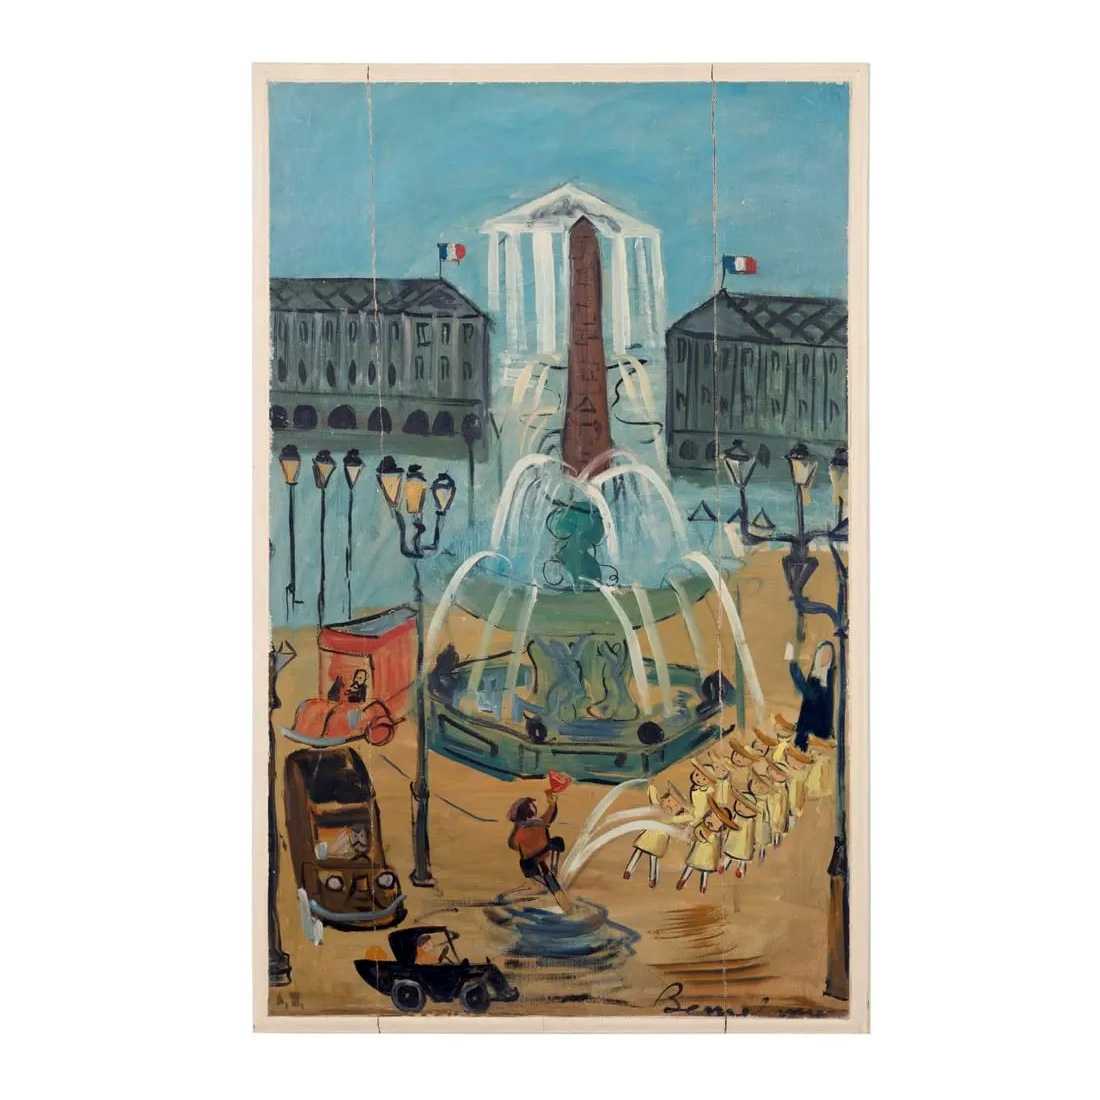 Ludwig Bemelmans, 'Madeline and the Bad Hat', estimated at $15,000-$25,000 at Ahlers & Ogletree.